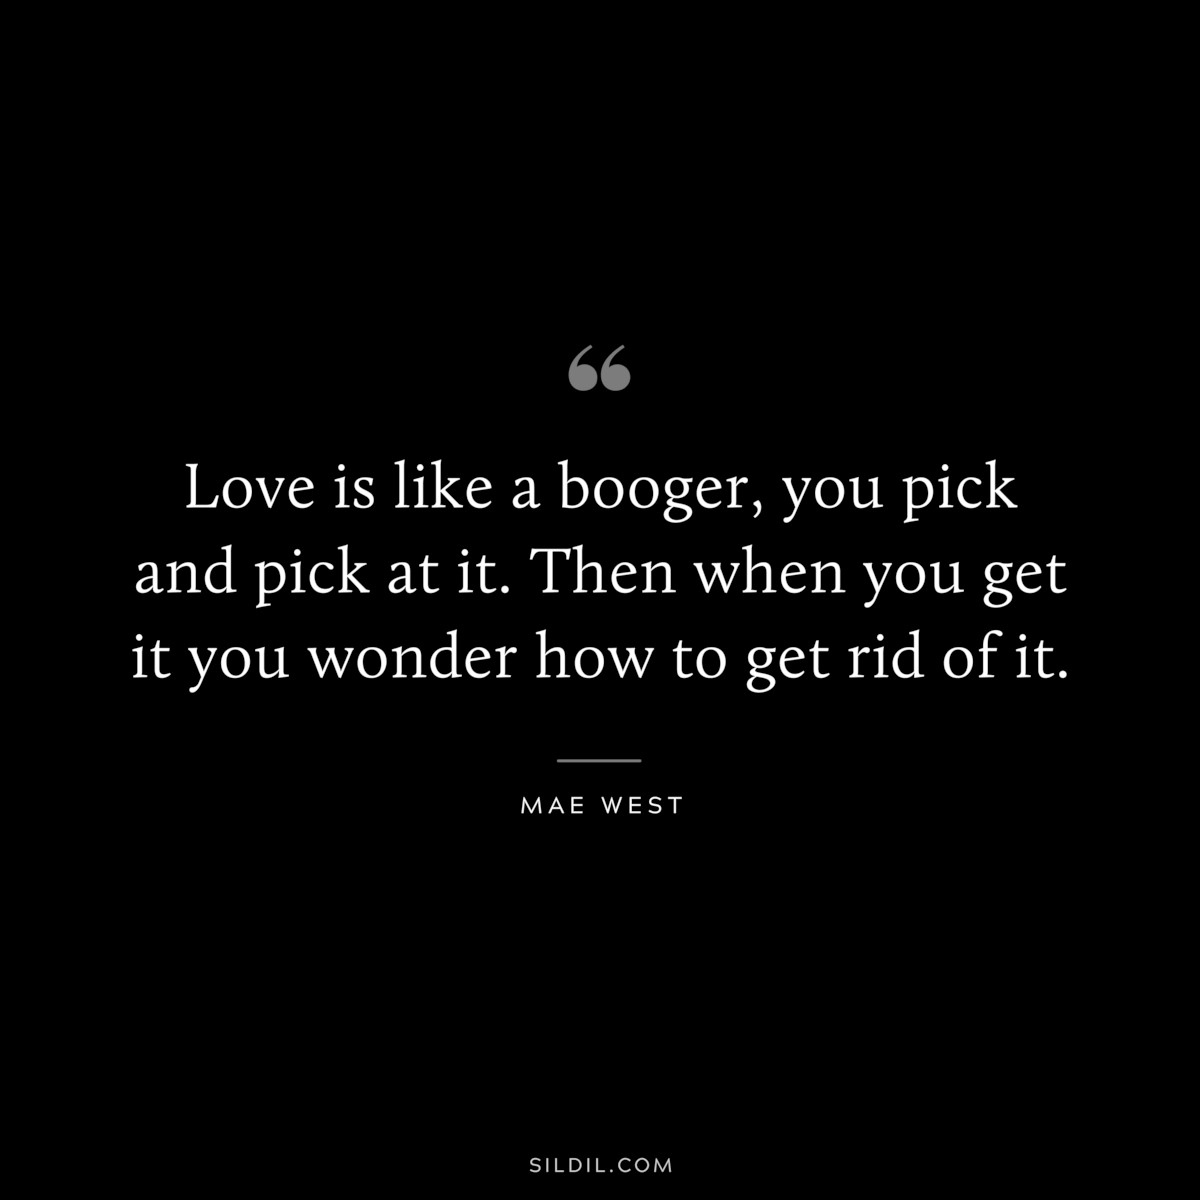 Love is like a booger, you pick and pick at it. Then when you get it you wonder how to get rid of it. ― Mae West